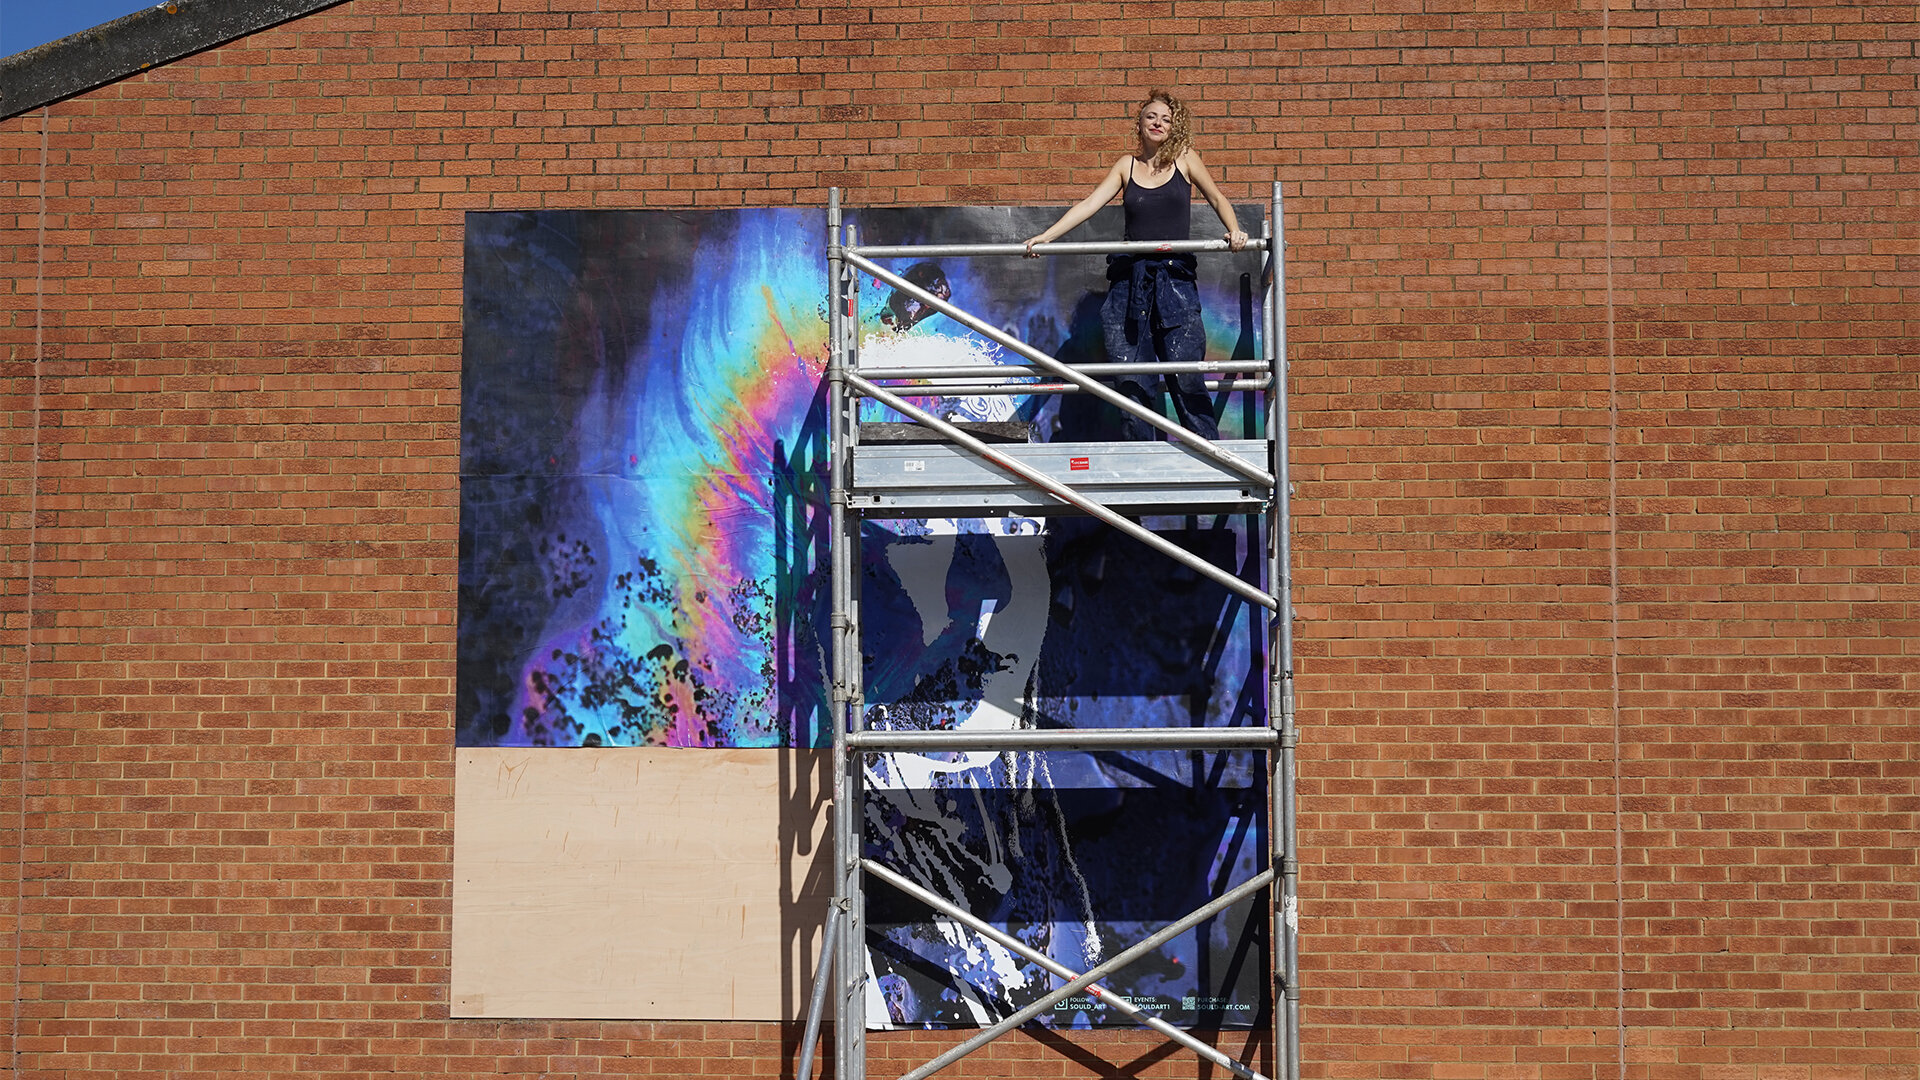 Watch as Urban artist, SoulD creates one of her art pieces, LARGE SCALE in just half a day. #streetart #murals #londonartist #womangraffiti #upandcomingartist 